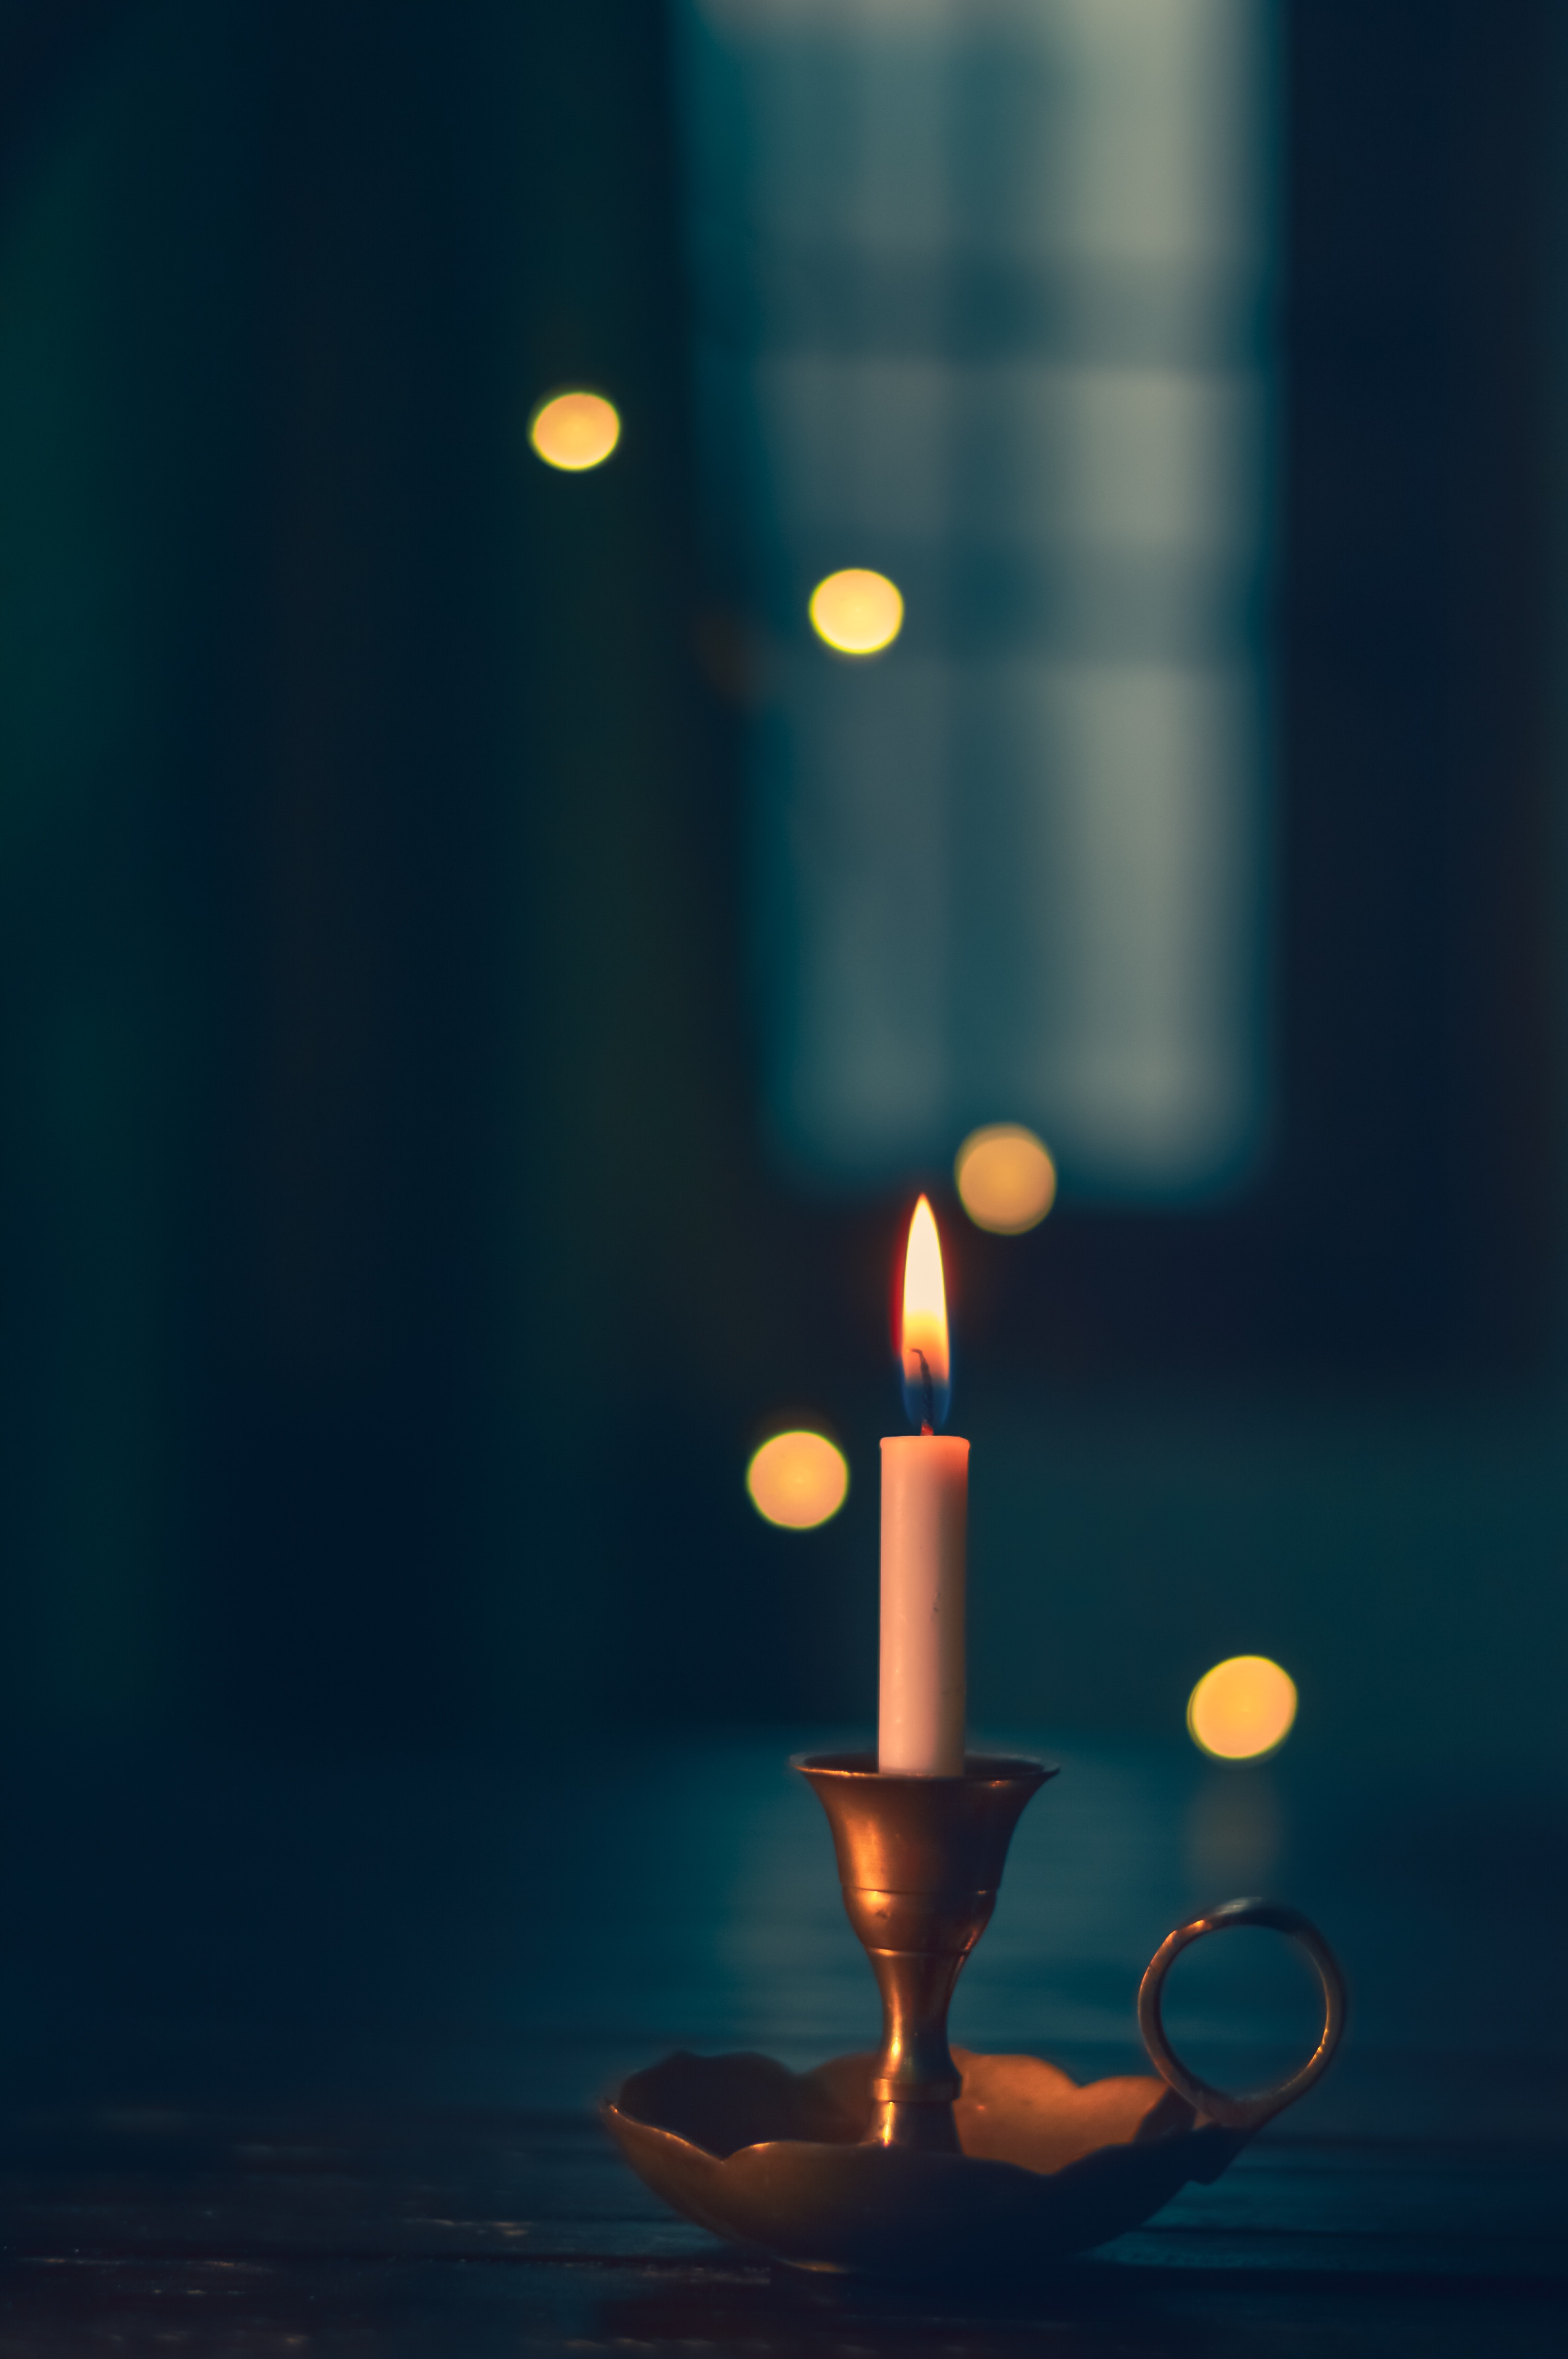 candle, blur, miscellanea, fire, miscellaneous, smooth, wick, wax, candlestick iphone wallpaper